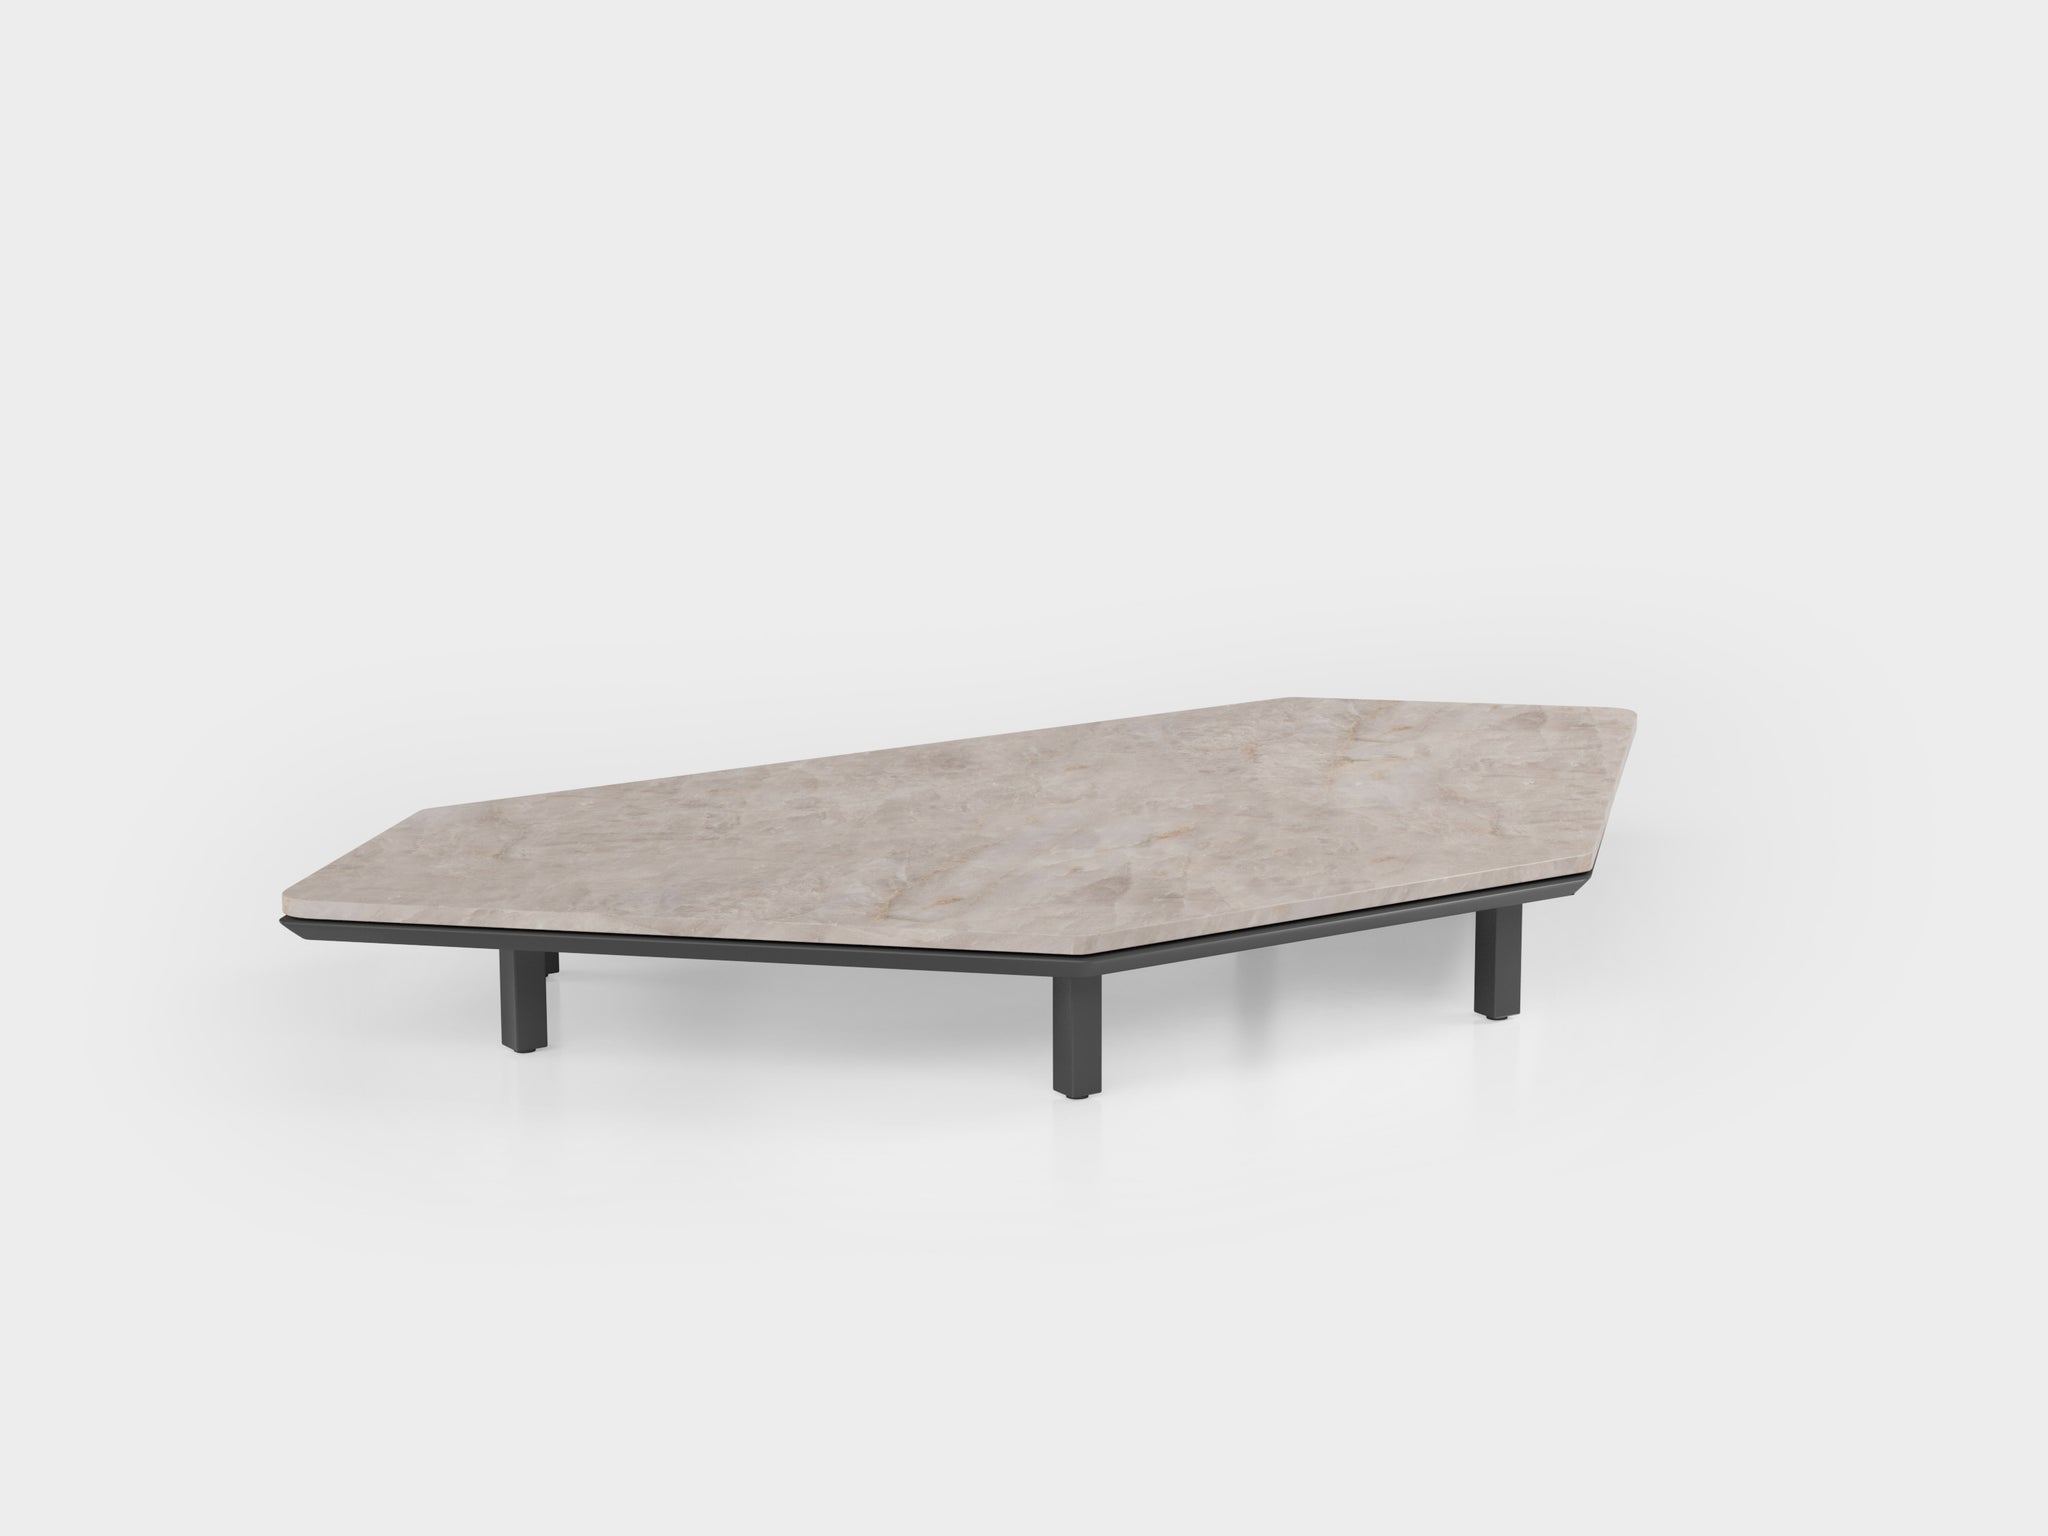 Flex Coffee Table Corner with aluminum frames and stone top, designed by Tatiana Mandelli